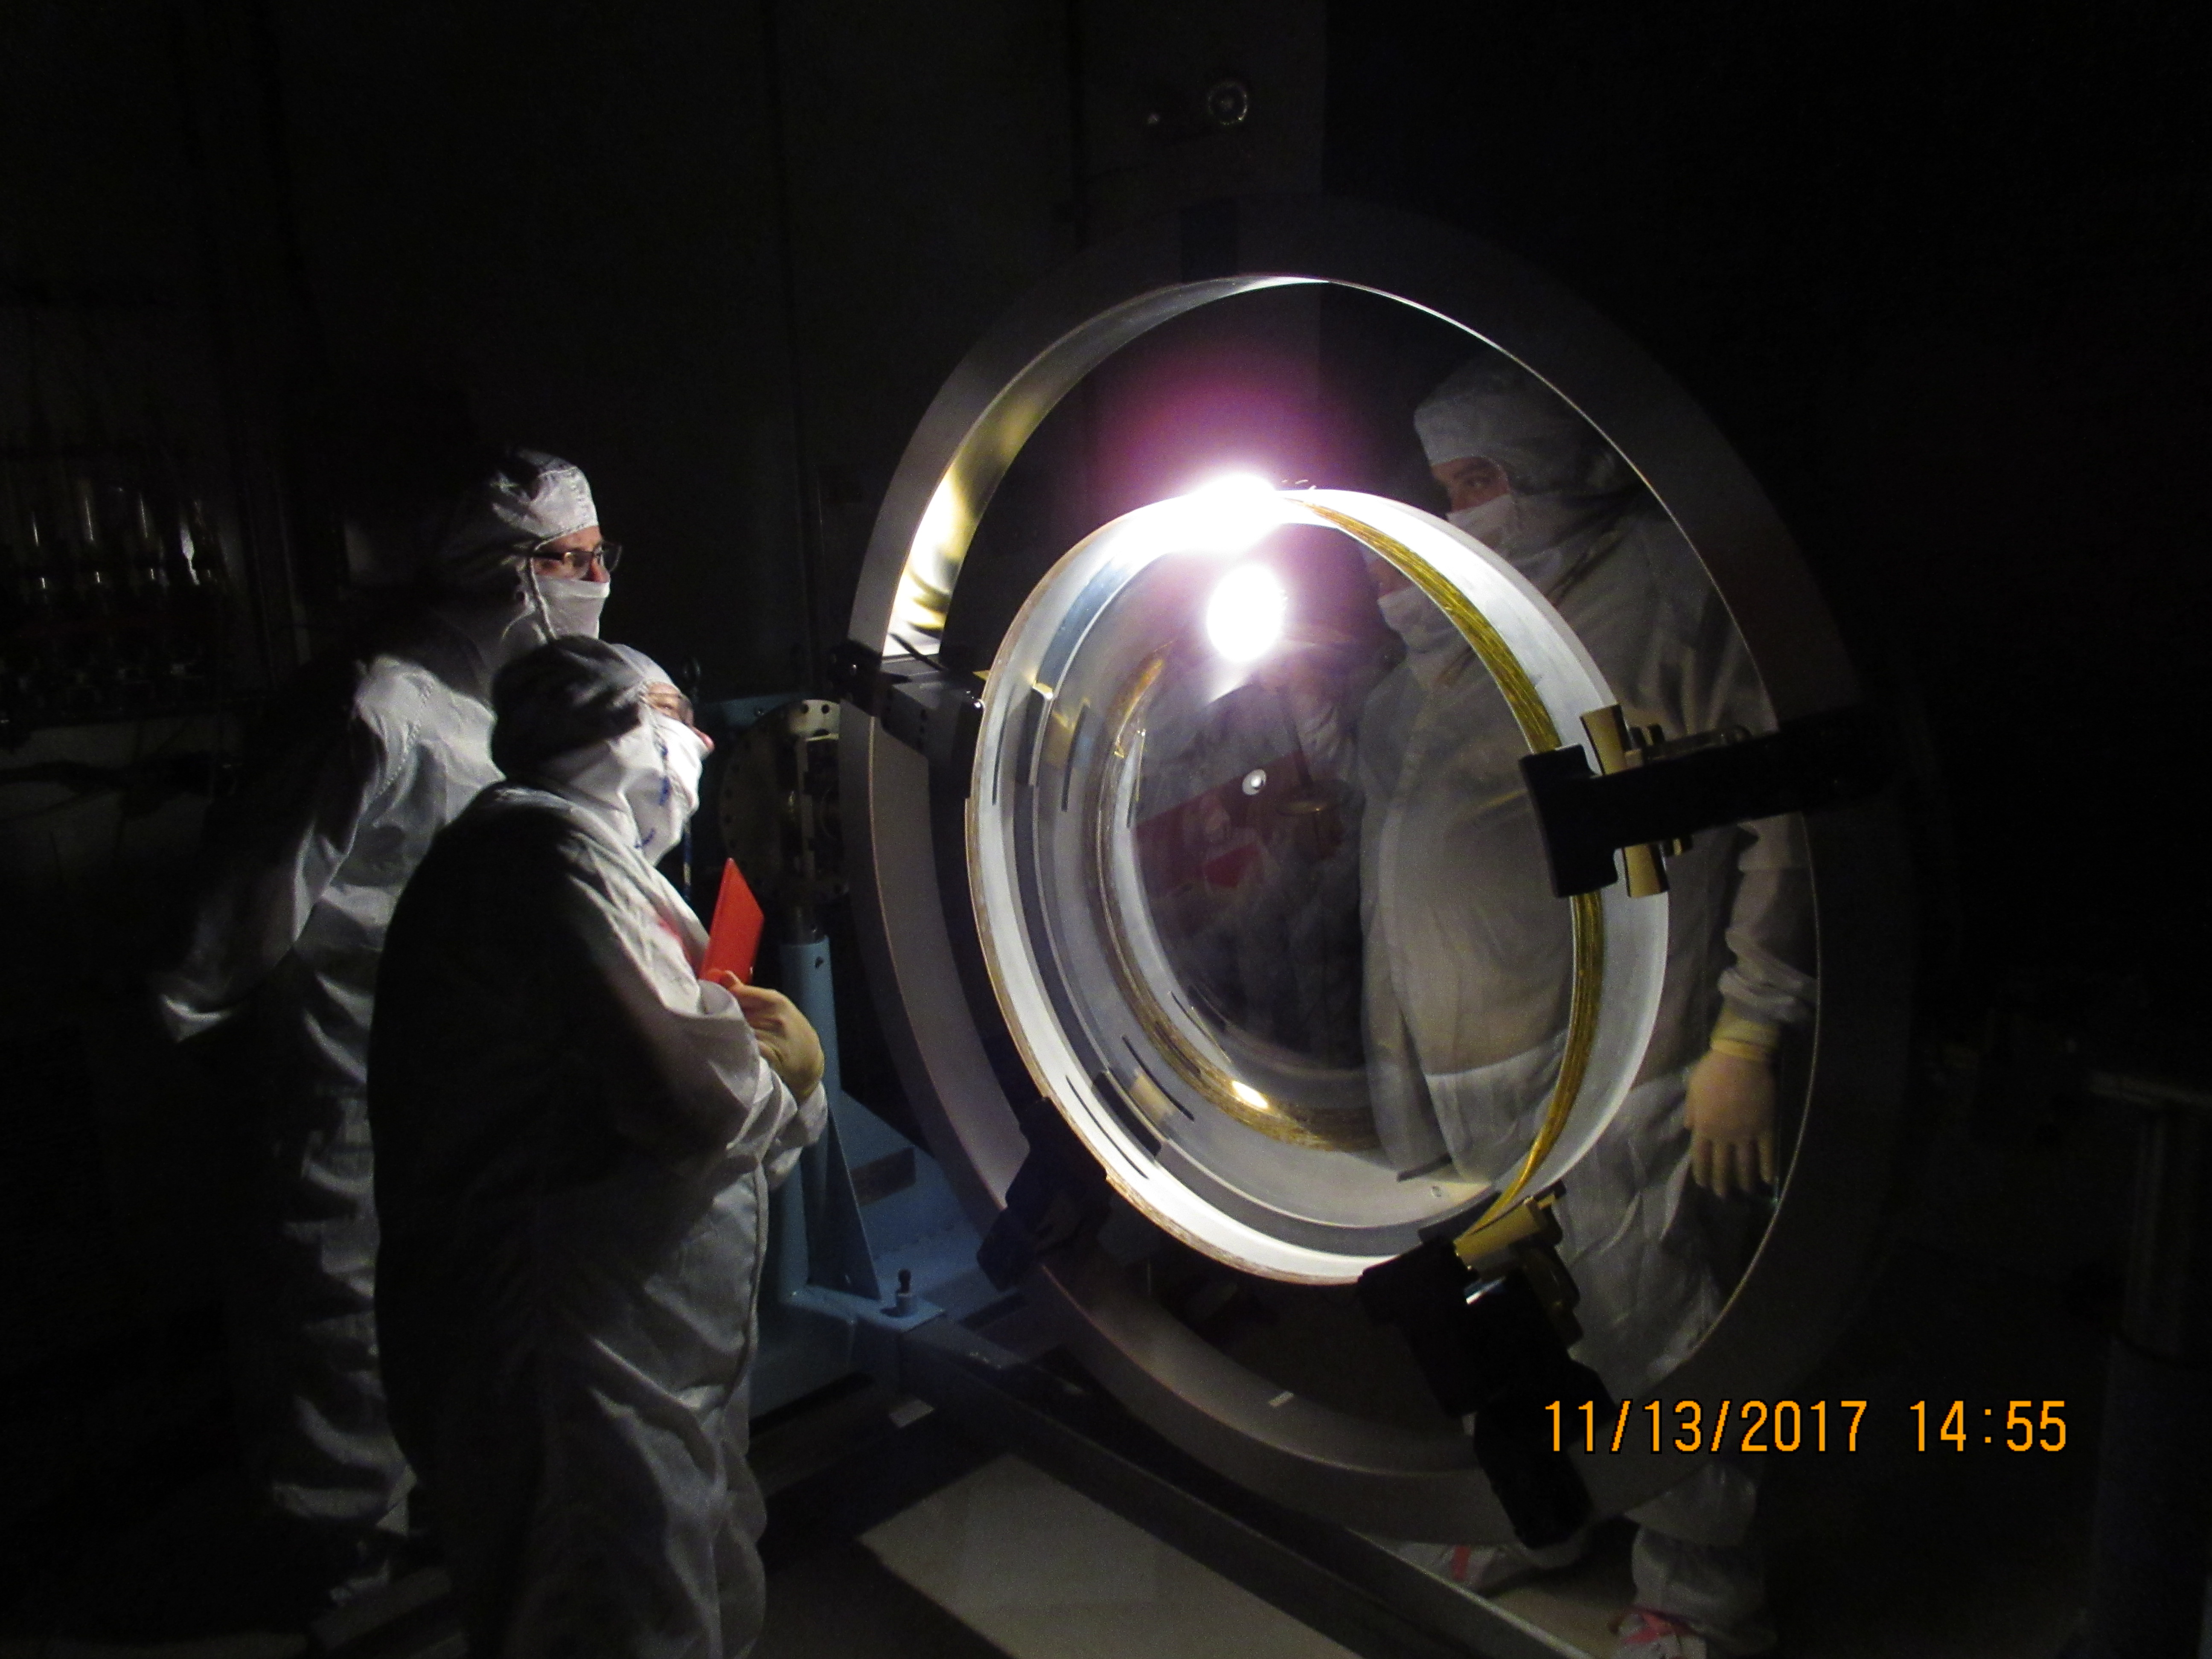 Photo - The lens is inspected for scratches after a coating is applied. The inspection is conducted by illuminating the lens with a bright light in a darkened room.